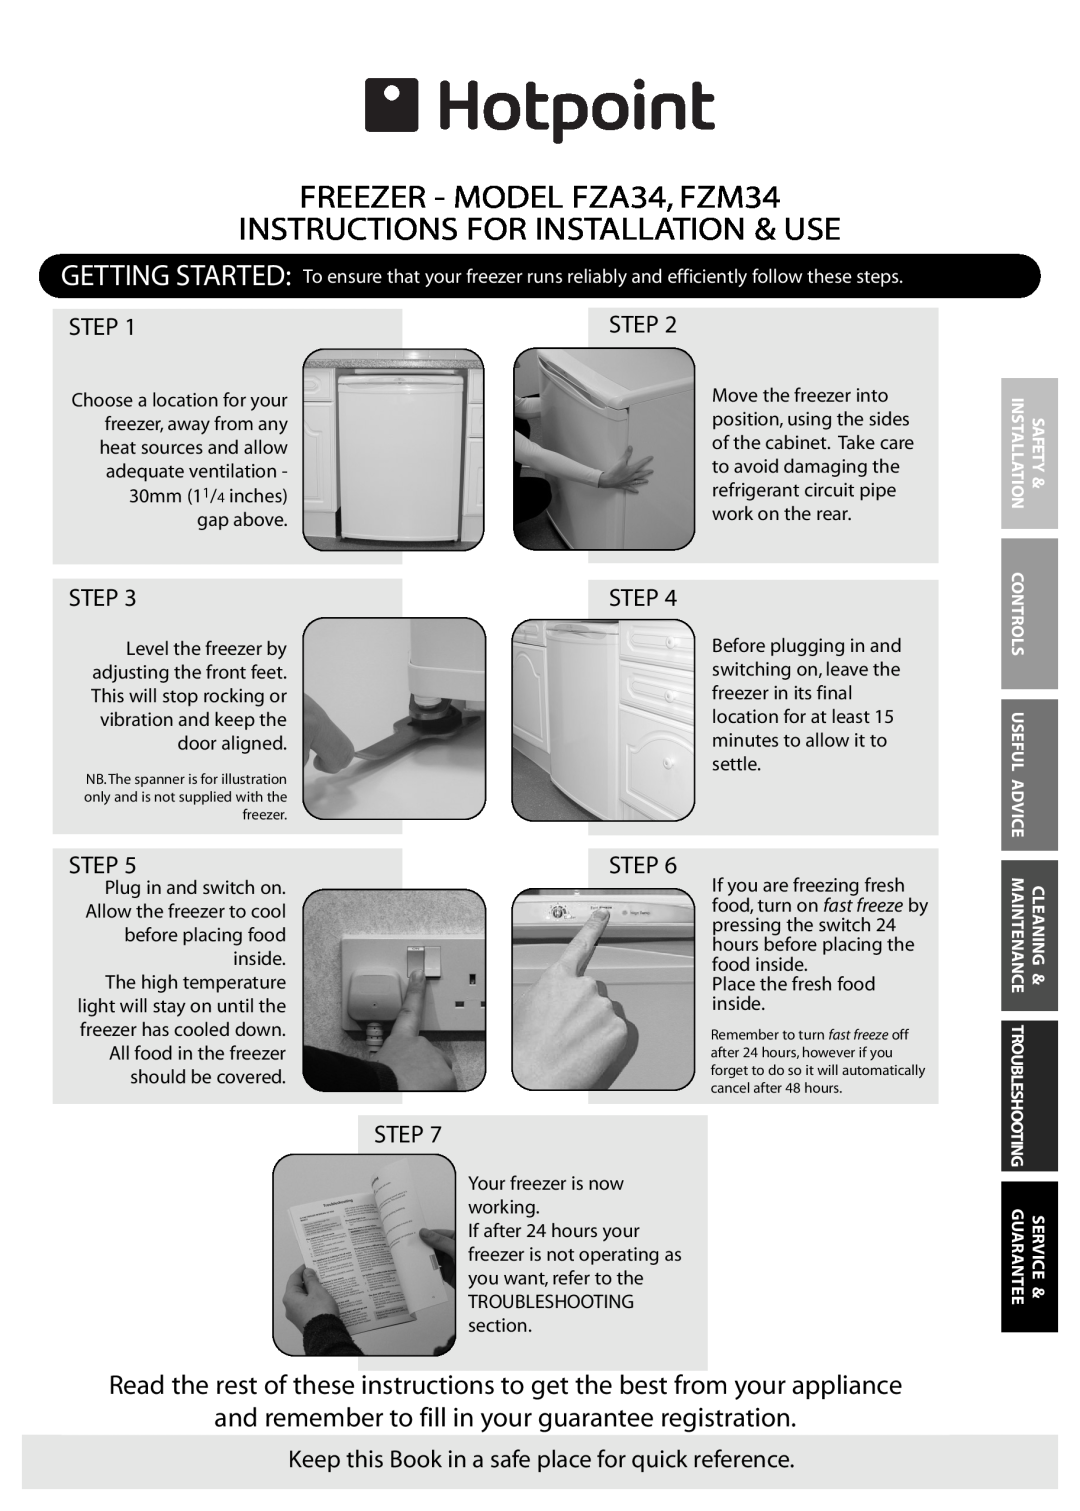 Hotpoint manual FREEZER - MODEL FZA34, FZM34 INSTRUCTIONS FOR INSTALLATION & USE, Getting Started 